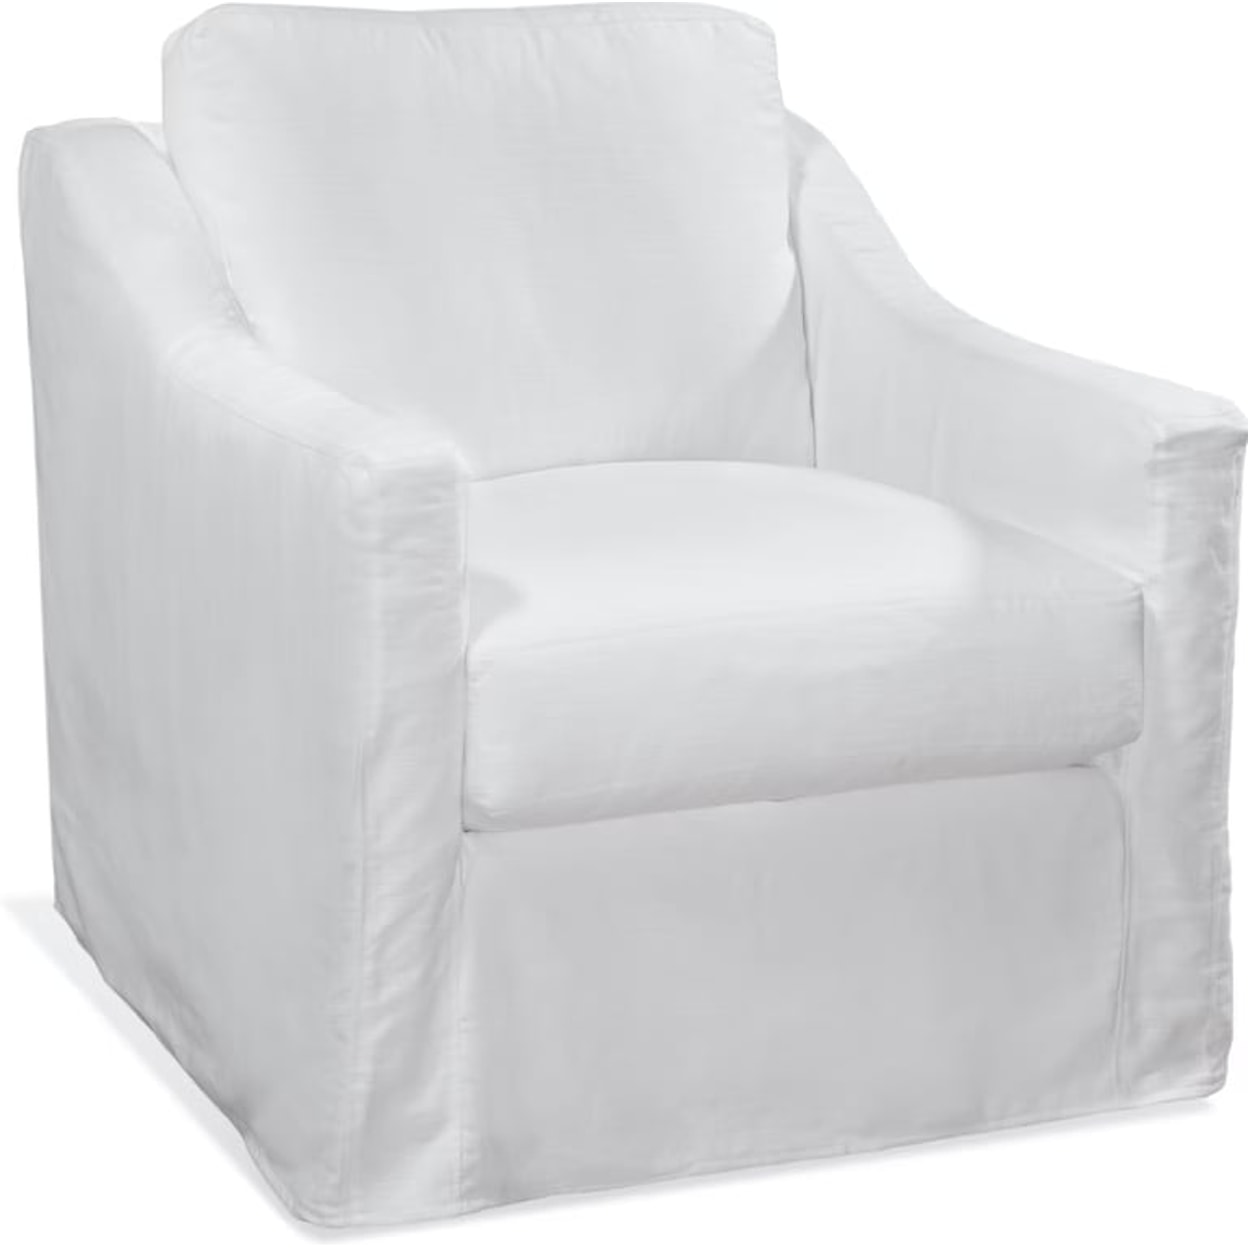 Braxton Culler Oliver Swivel Chair with Slipcover